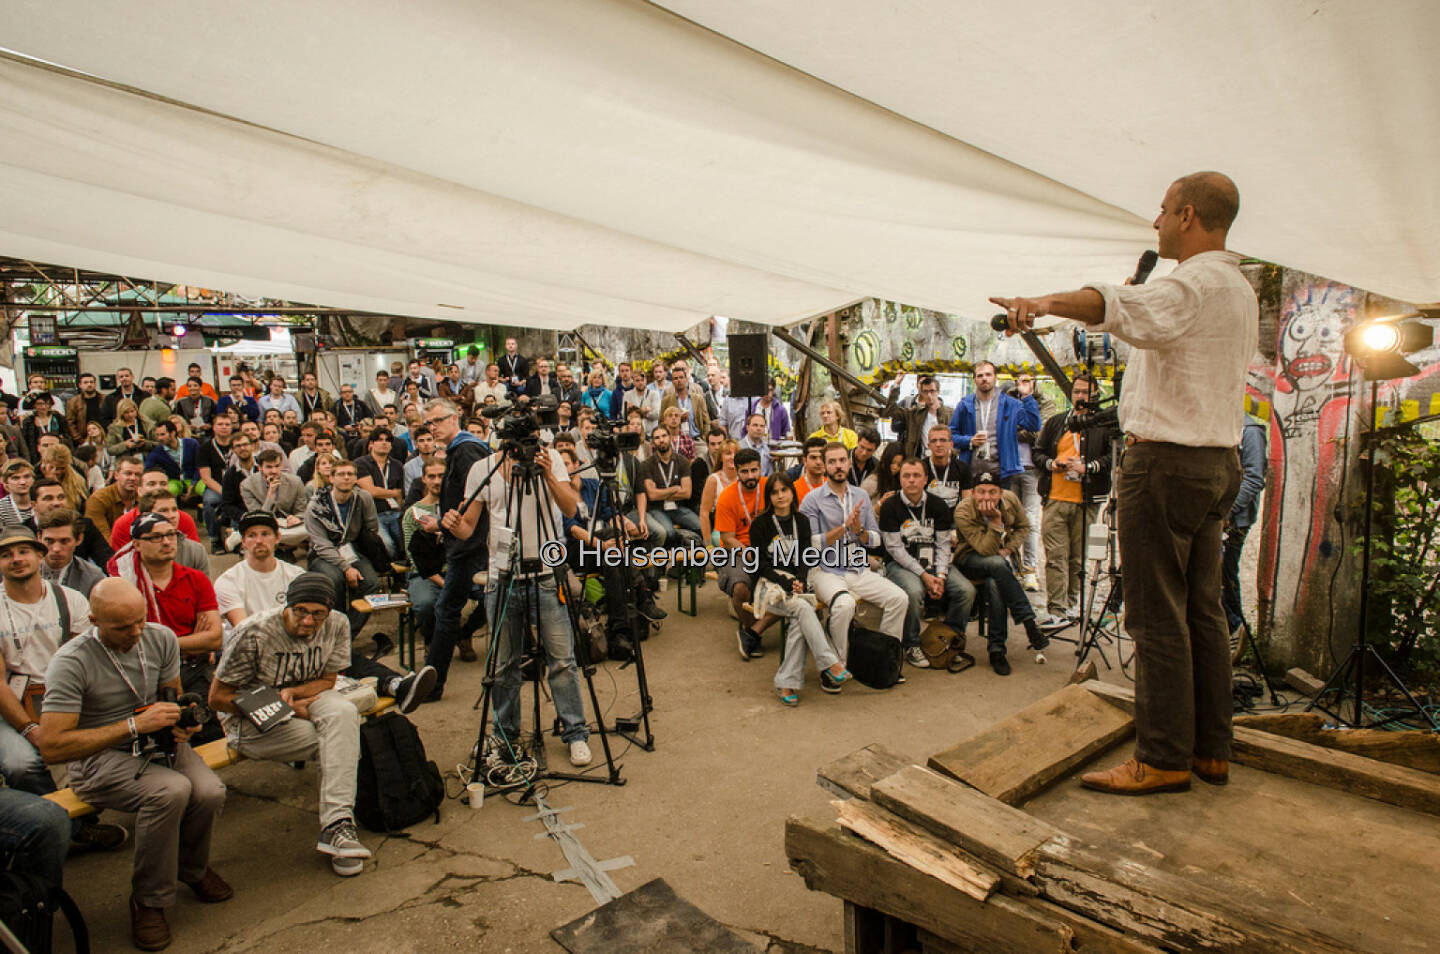 Evan Nisselson – The European Pirate Summit – Cologne, Germany, August 26, 2013